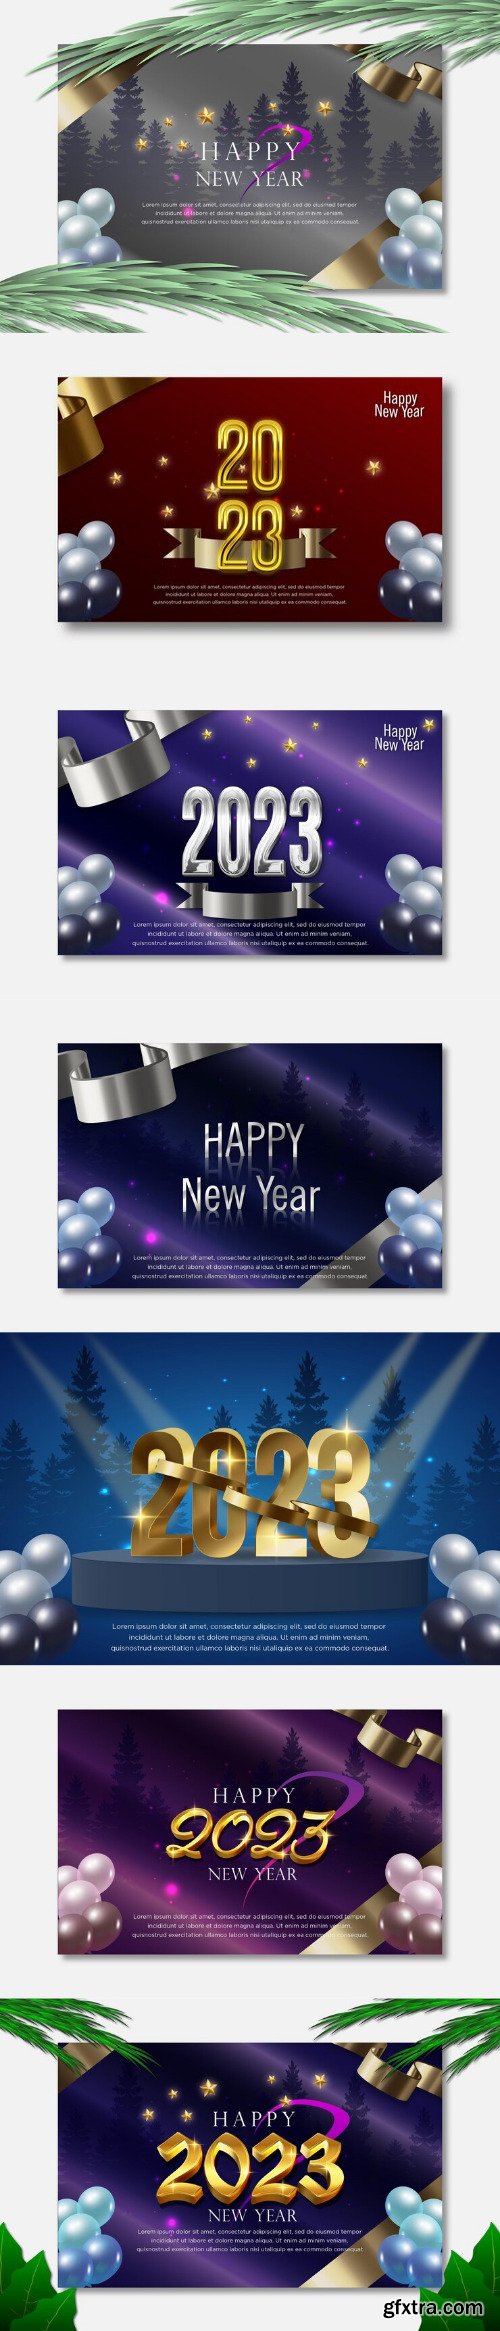 Happy new year 2023 banner template design